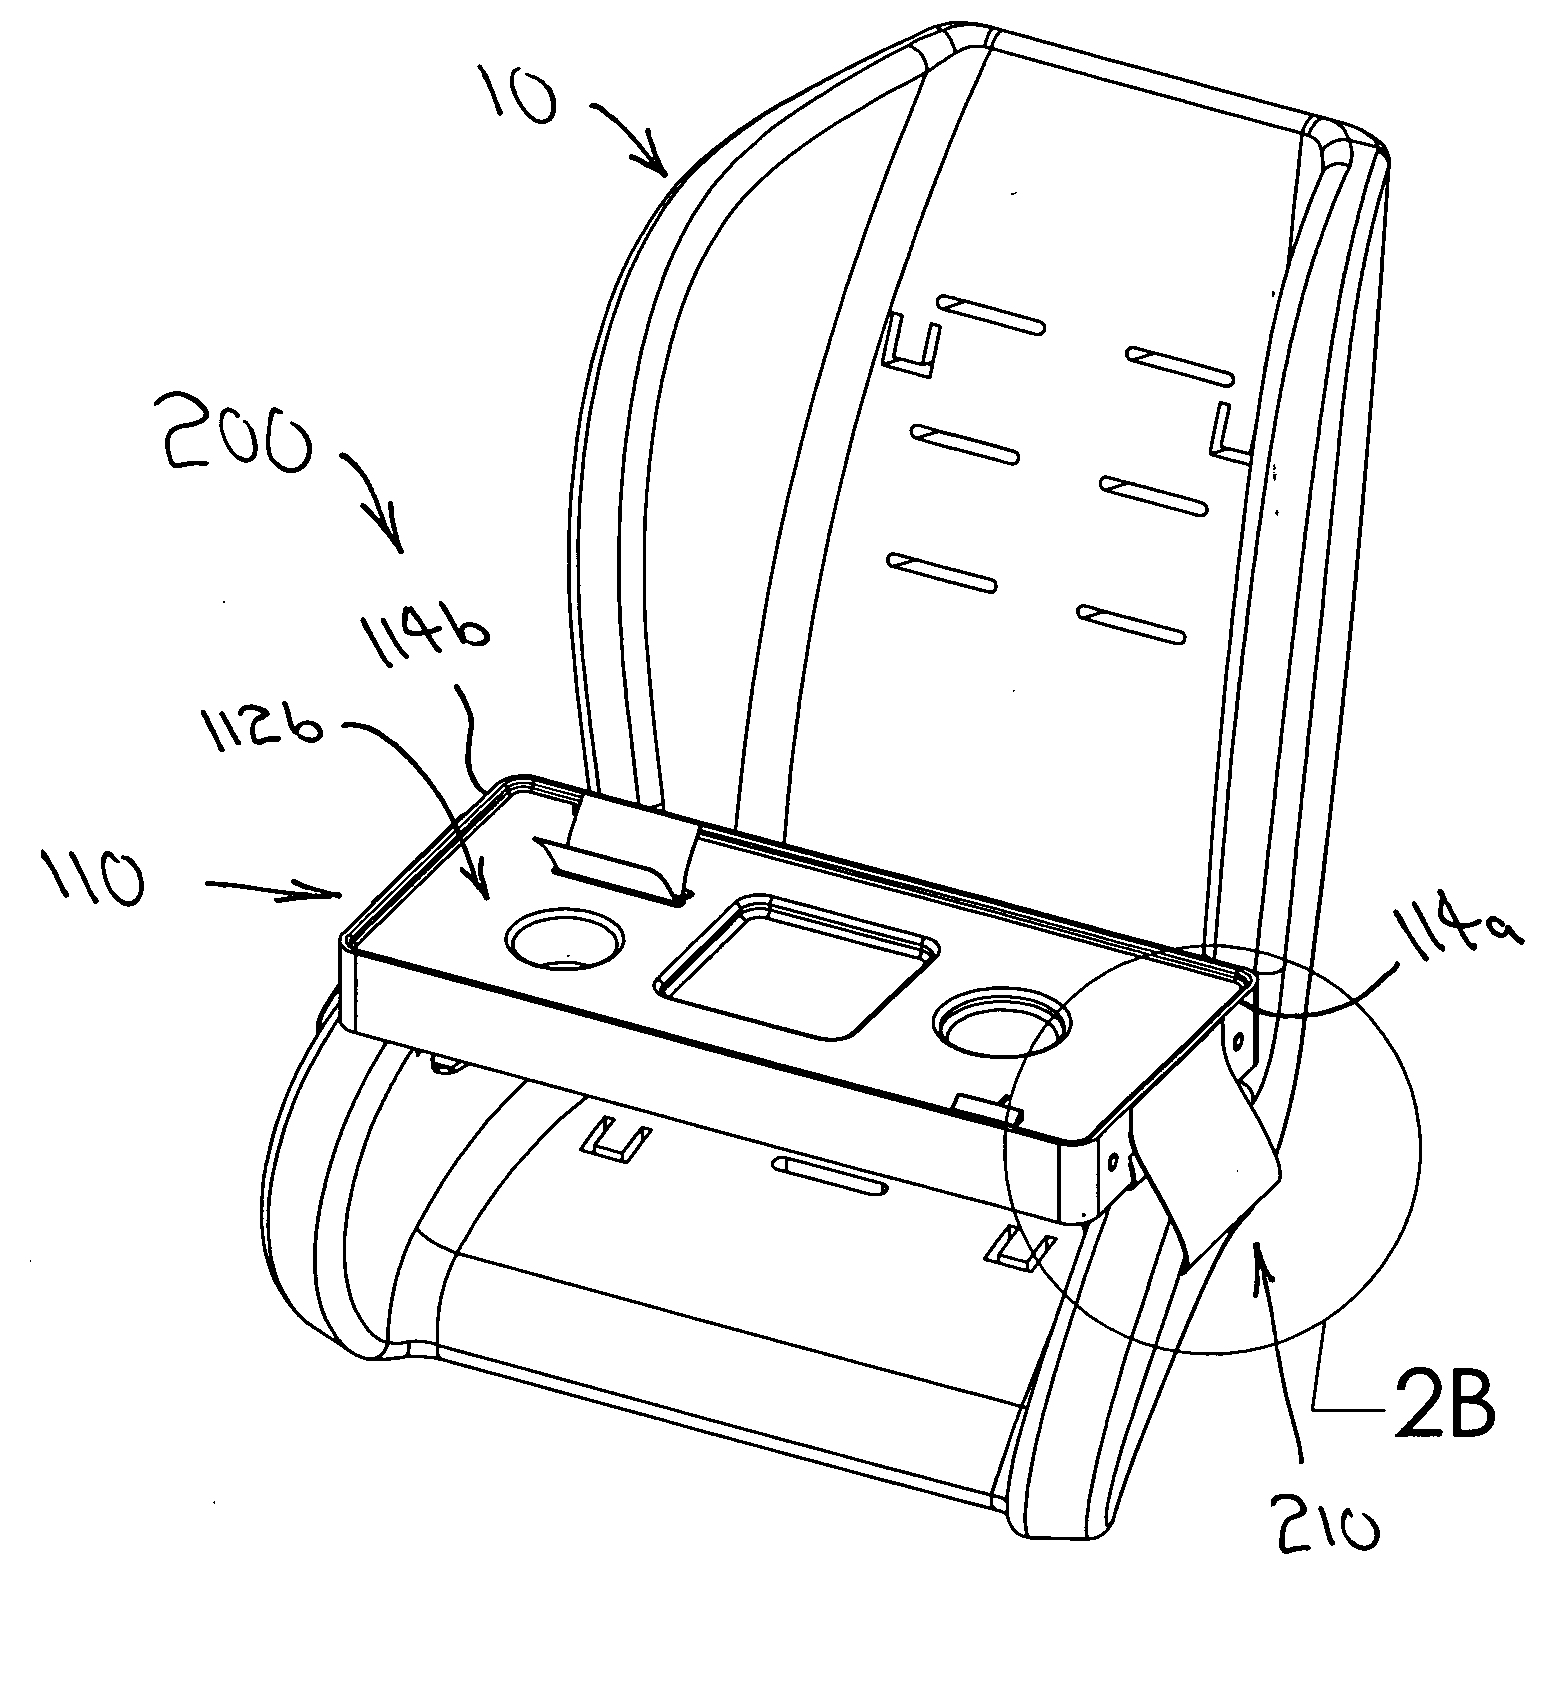 Reversible food and game tray device